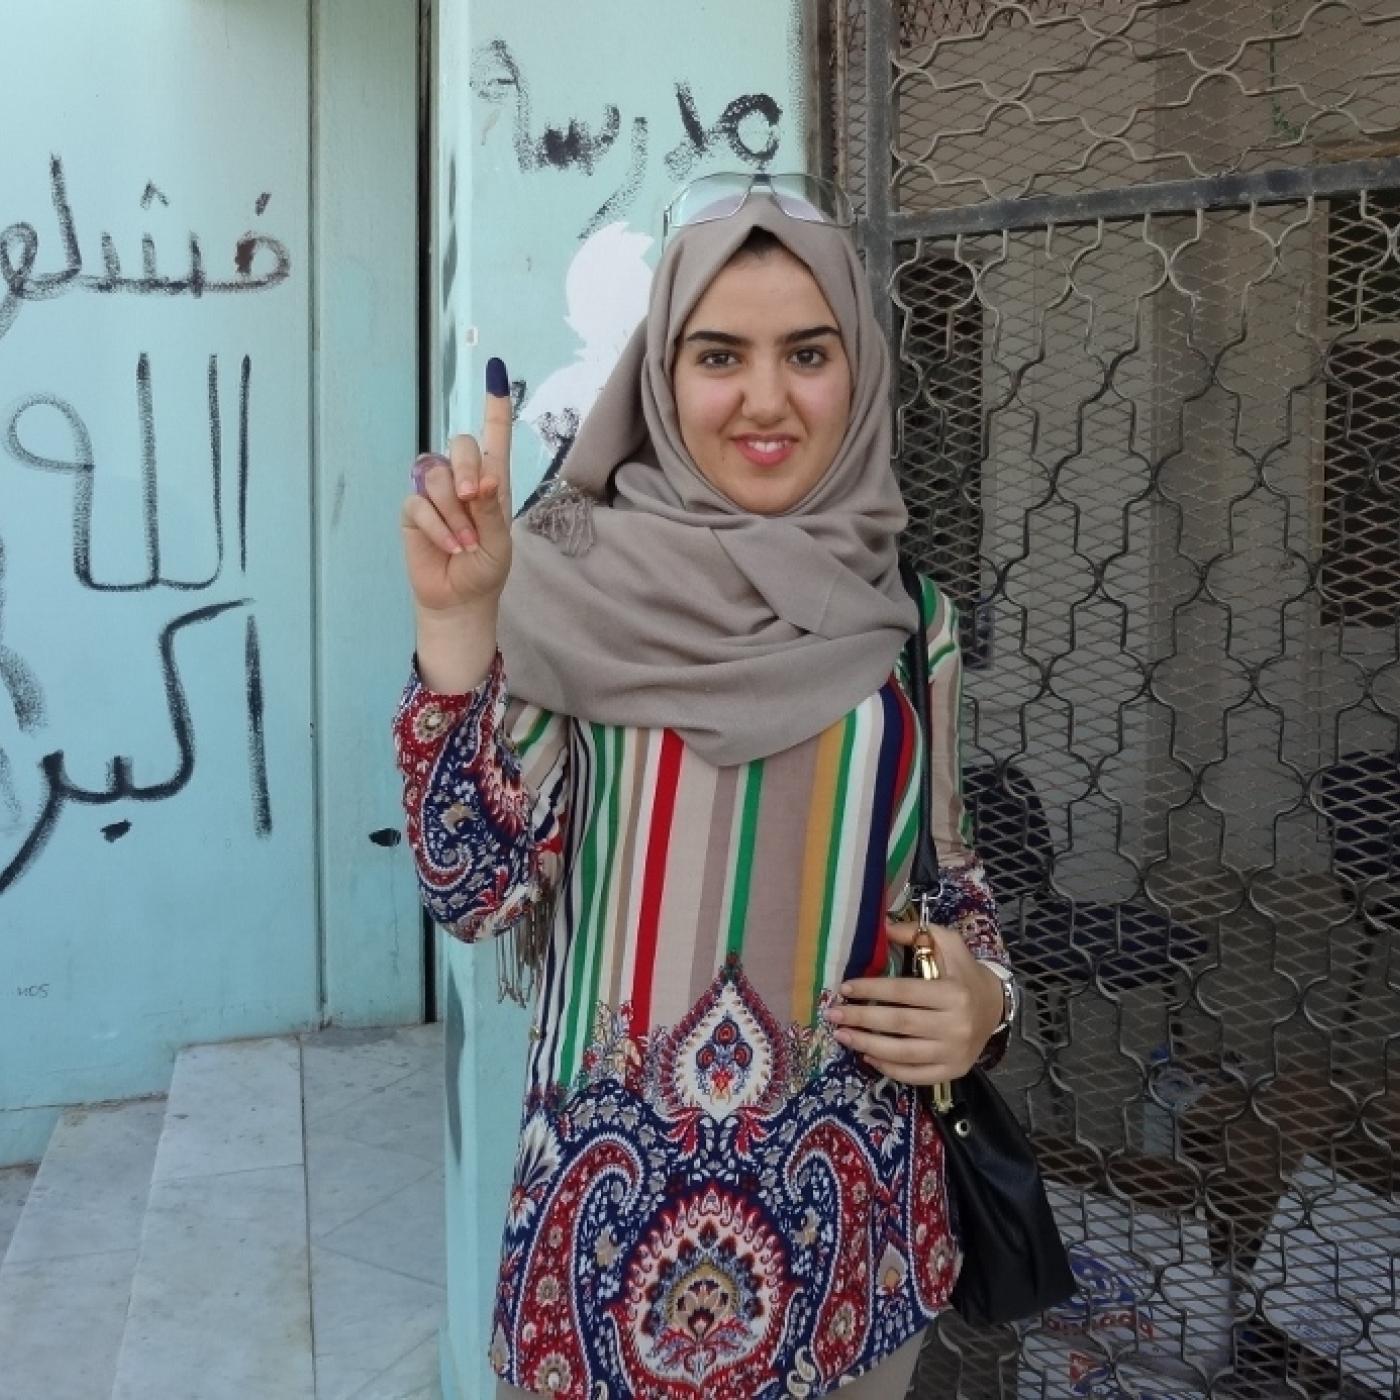 Libyan woman displays finger with indelible ink after casting a ballot.